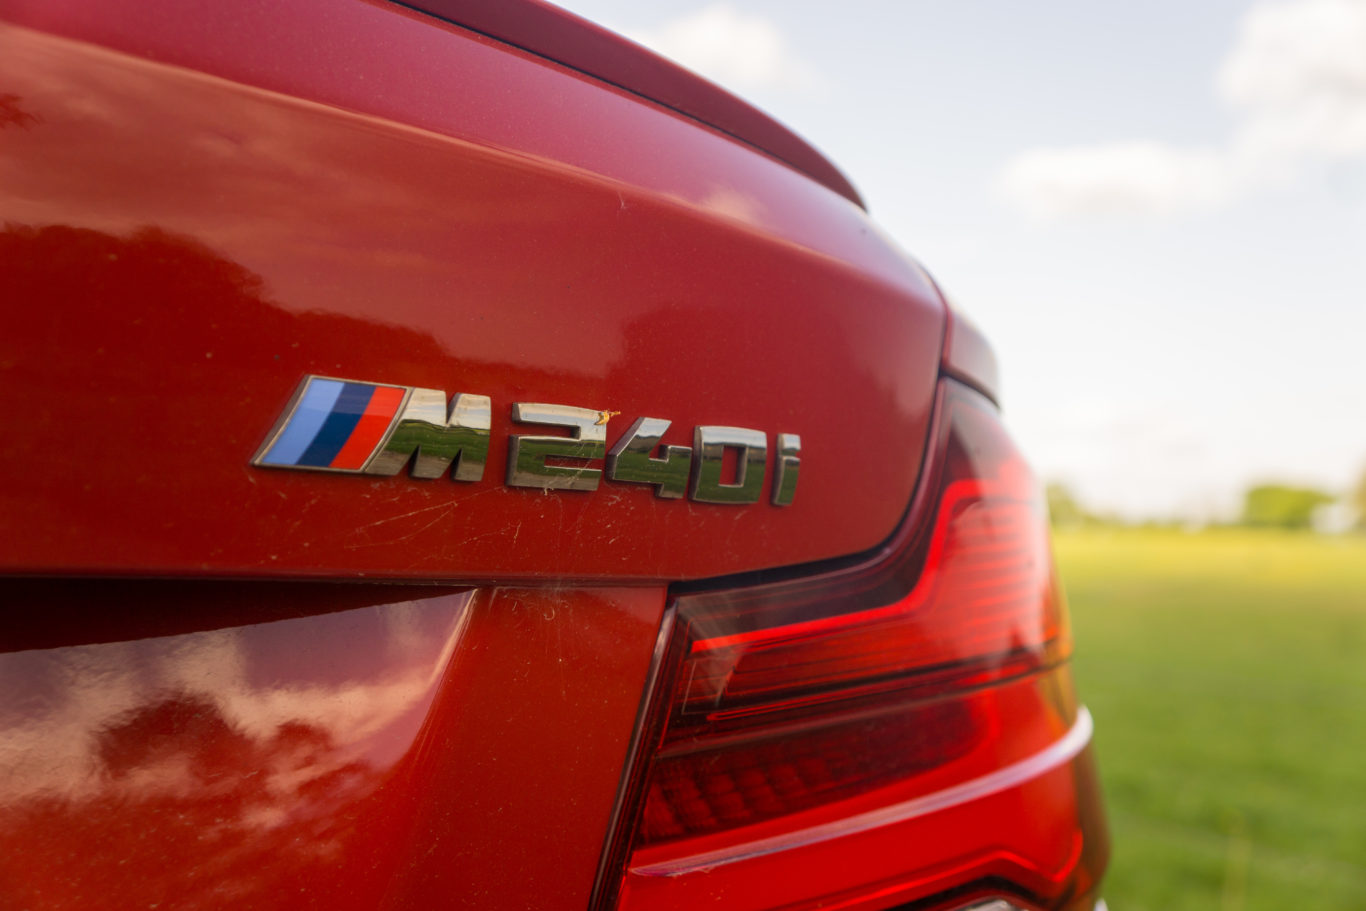 The M240i is definitely one of the sweet spots in the range